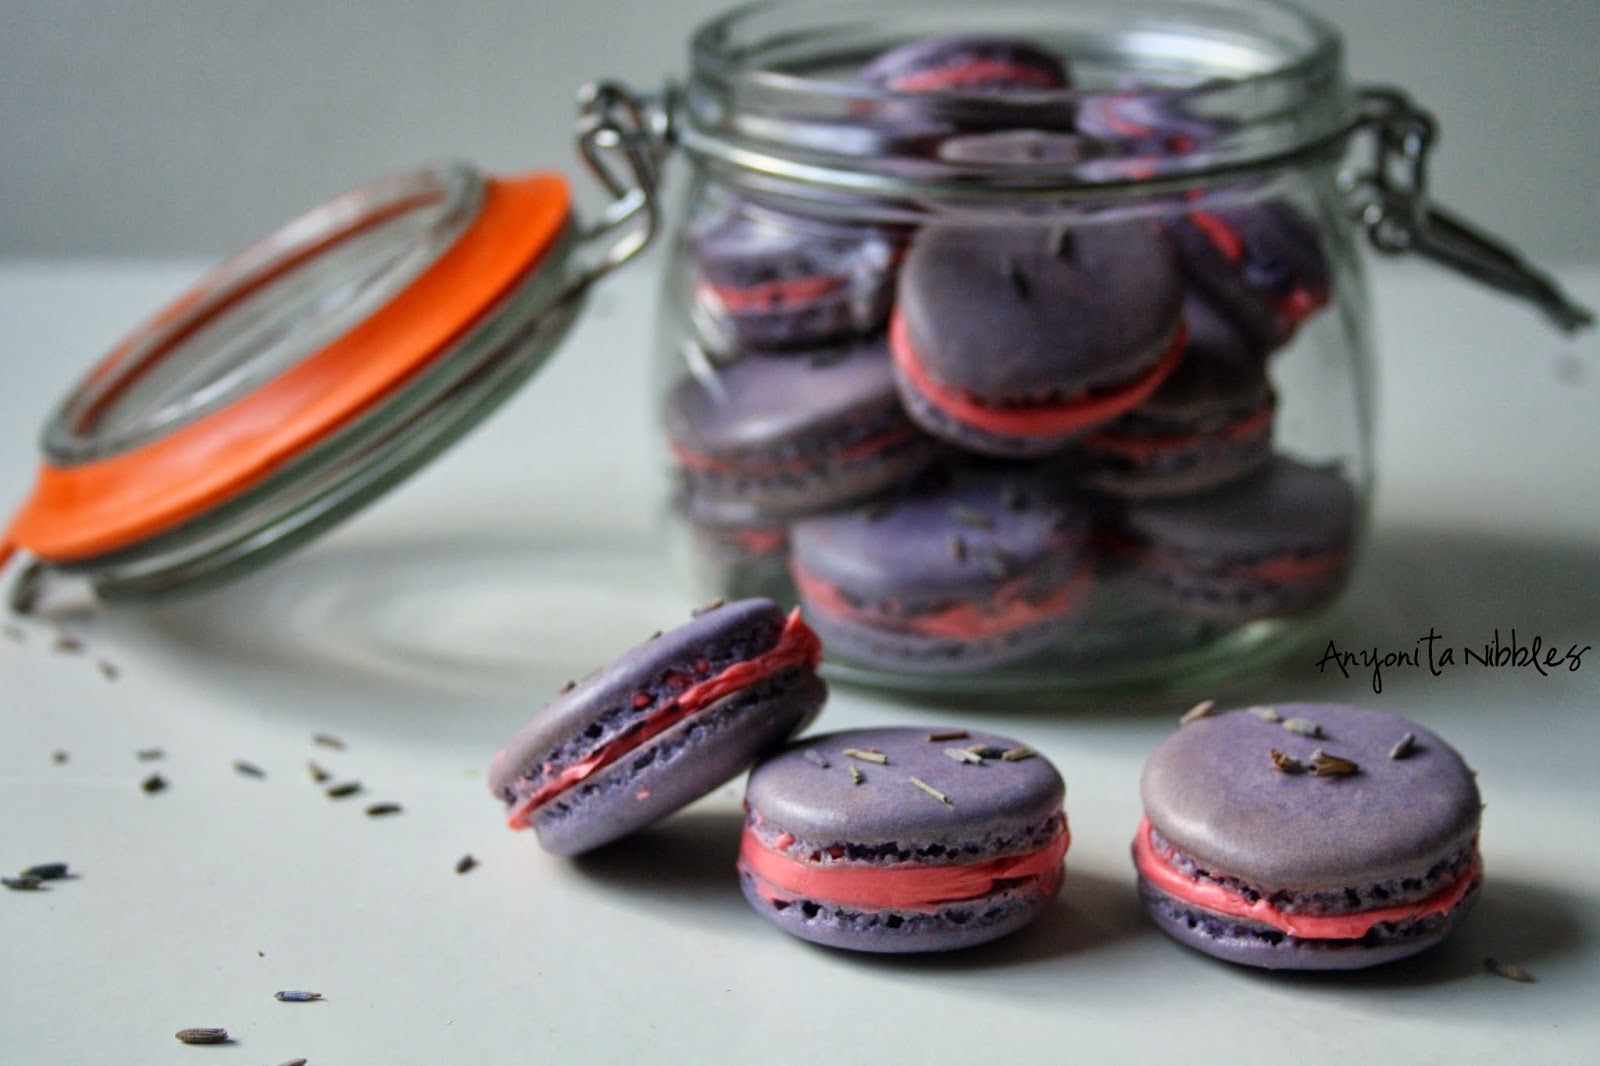 Three lavender and rose #French #macarons ready to eat from @anyonita